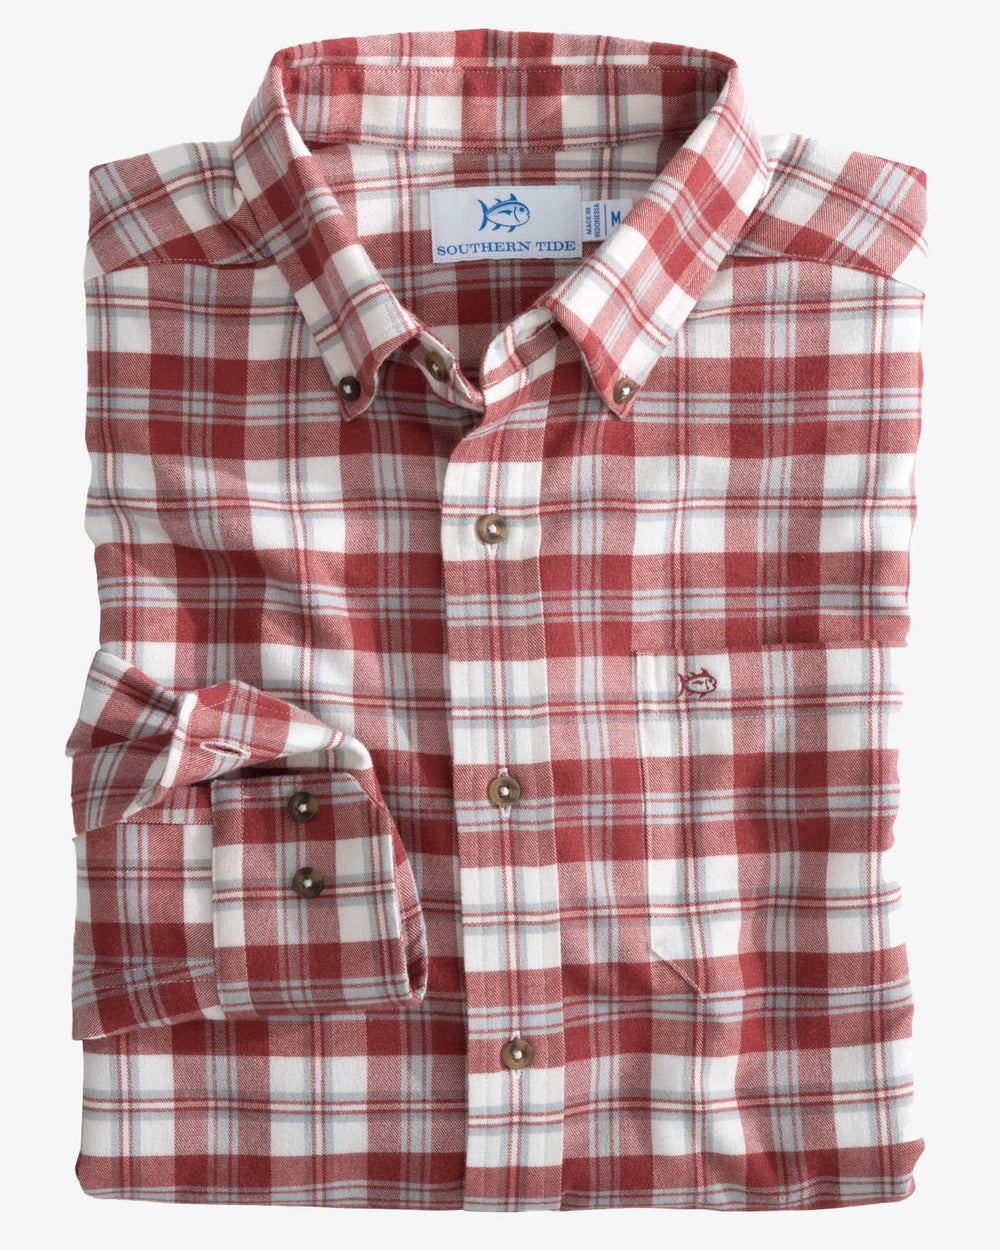 The front view of the Southern Tide Flannel Intercoastal Durant Plaid Long Sleeve Sportshirt by Southern Tide - Tuscany Red